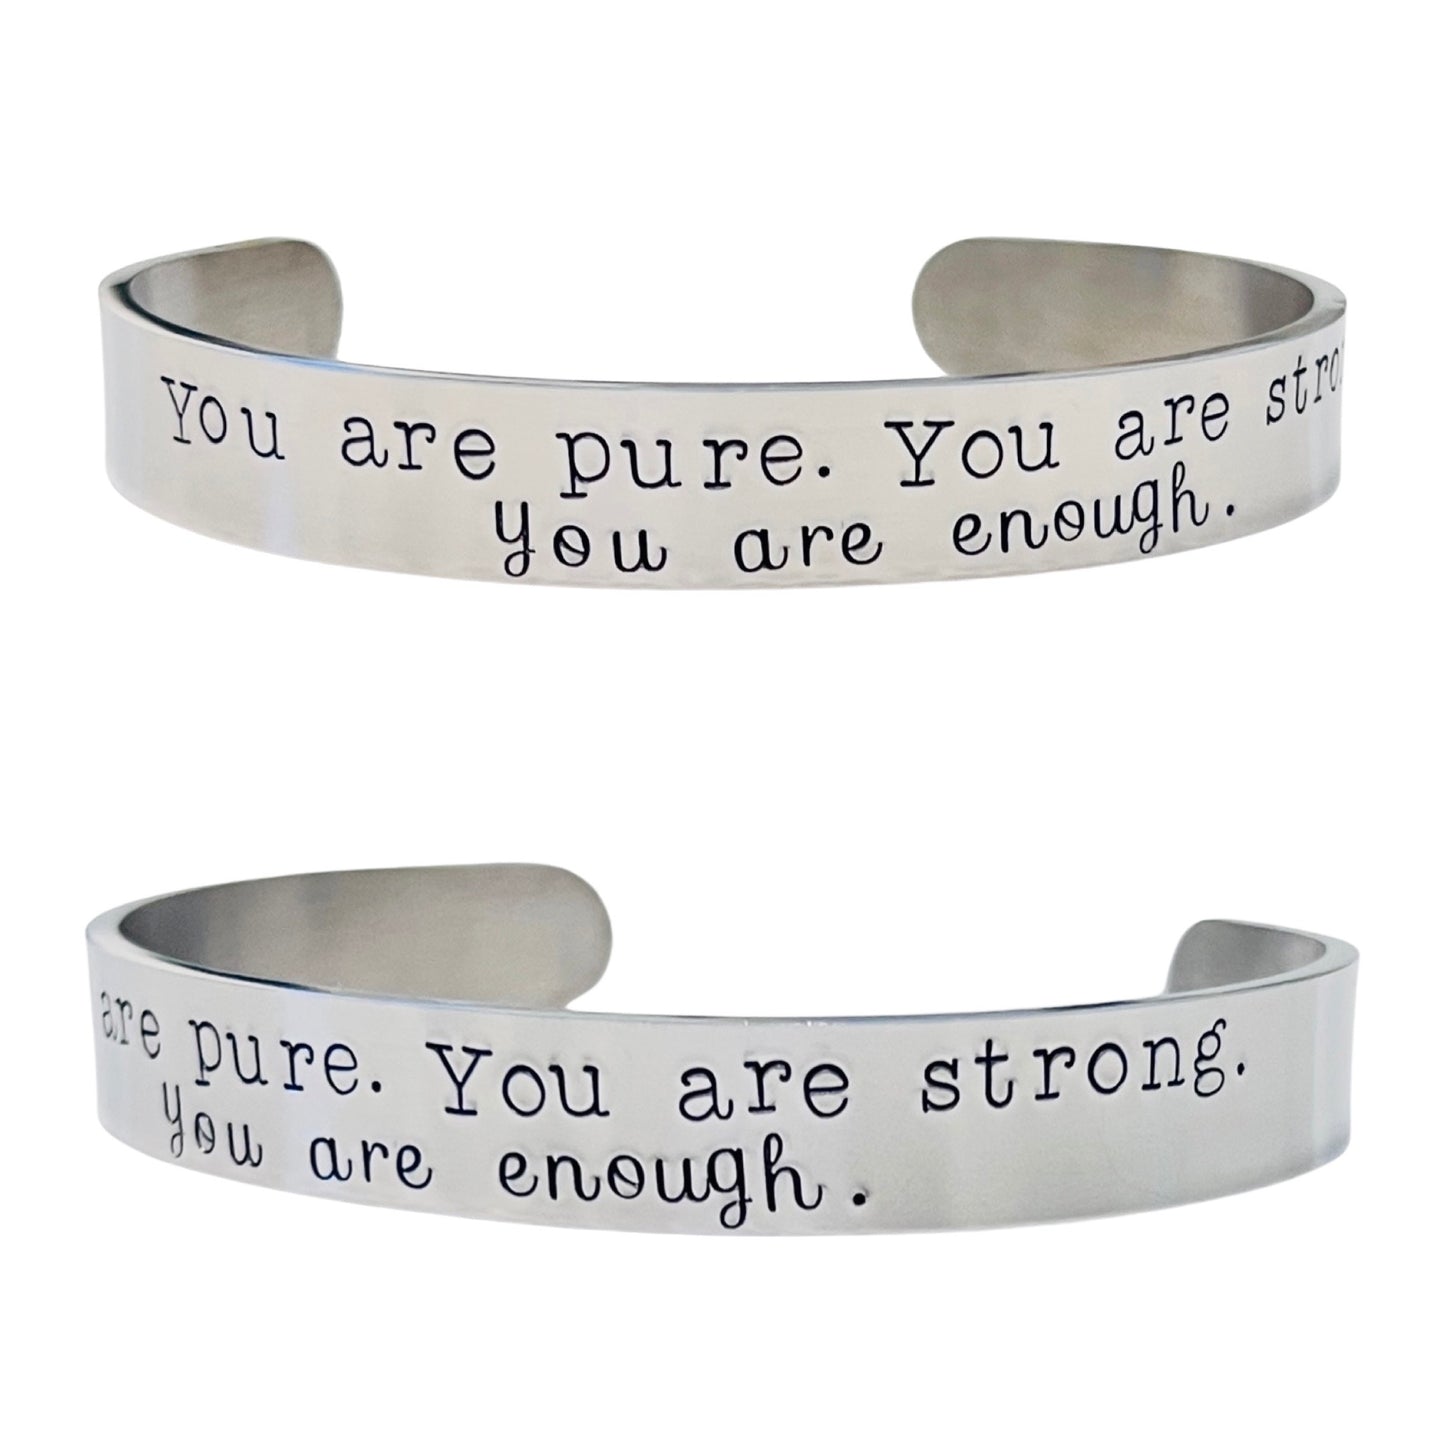 You are pure. You are strong. You are enough. | Kennedy Ryan | Cuff Bracelet